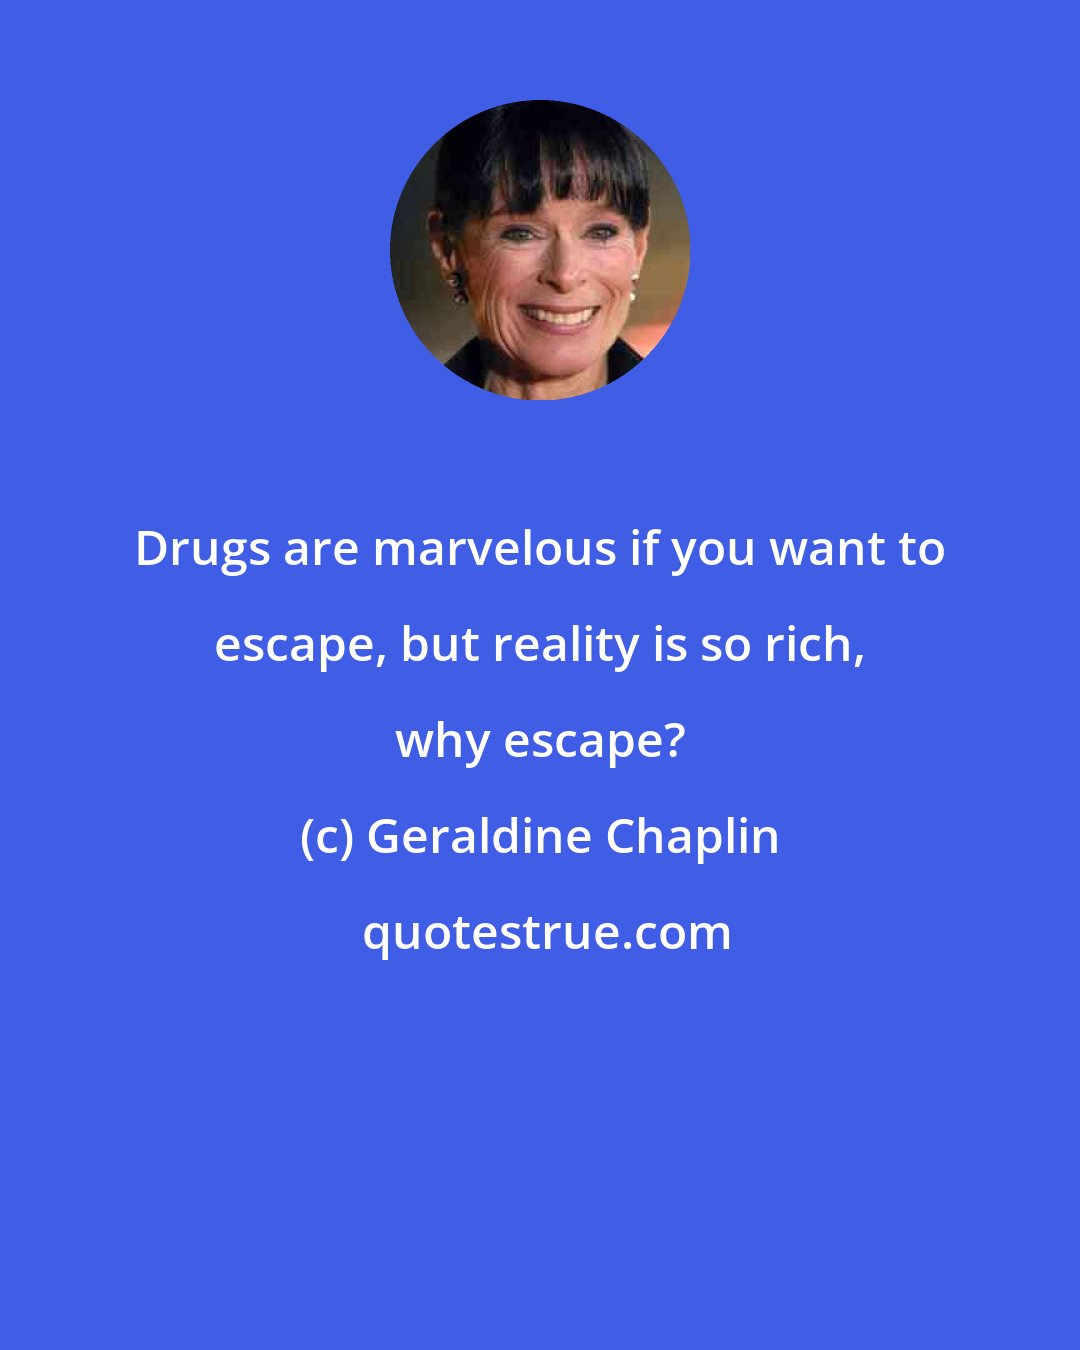 Geraldine Chaplin: Drugs are marvelous if you want to escape, but reality is so rich, why escape?